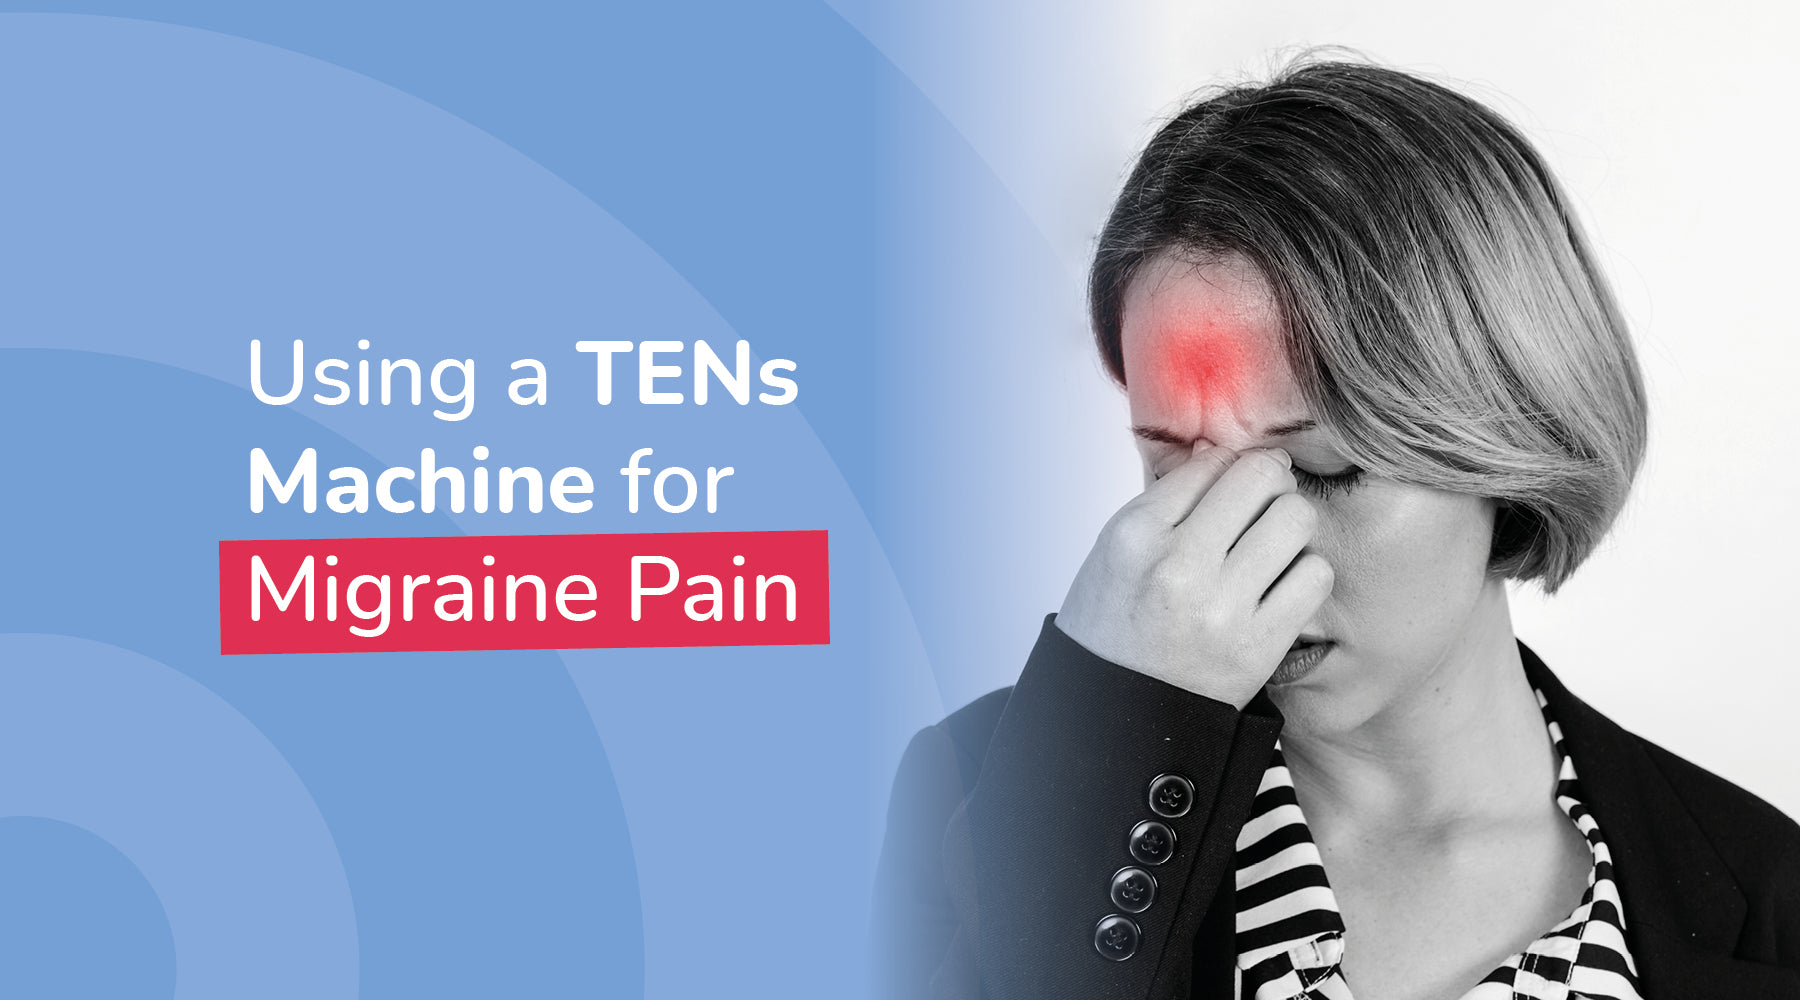 Using a TENS Machine for Migraine Pain